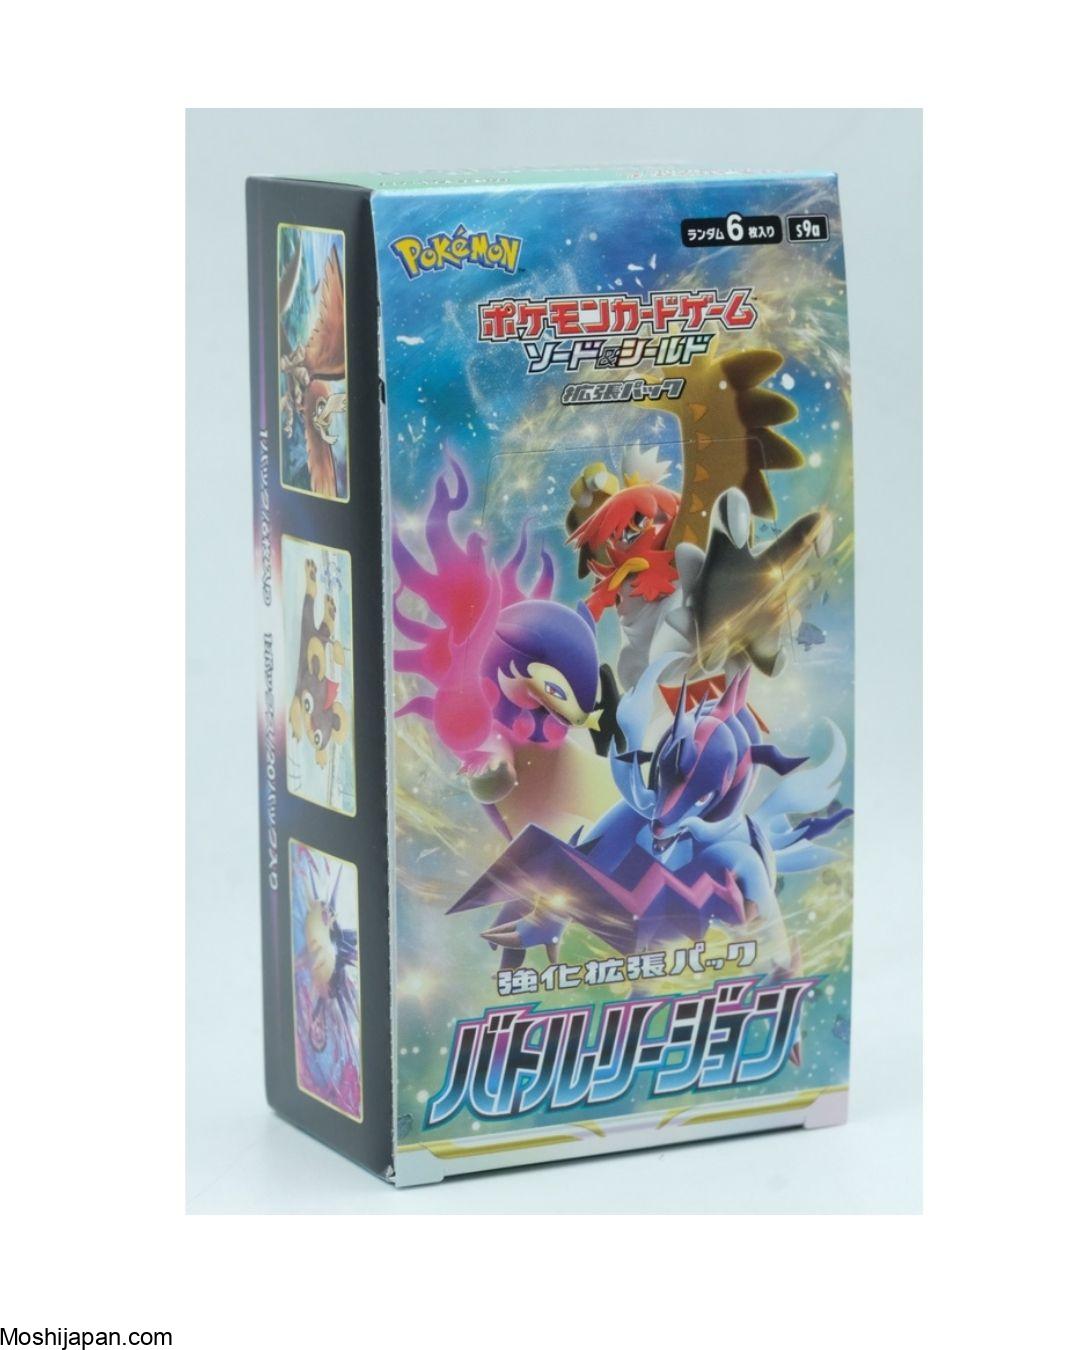 Pokemon Trading Card Game Battle Region S9a Booster Box - Japanese Pokemon Cards 4